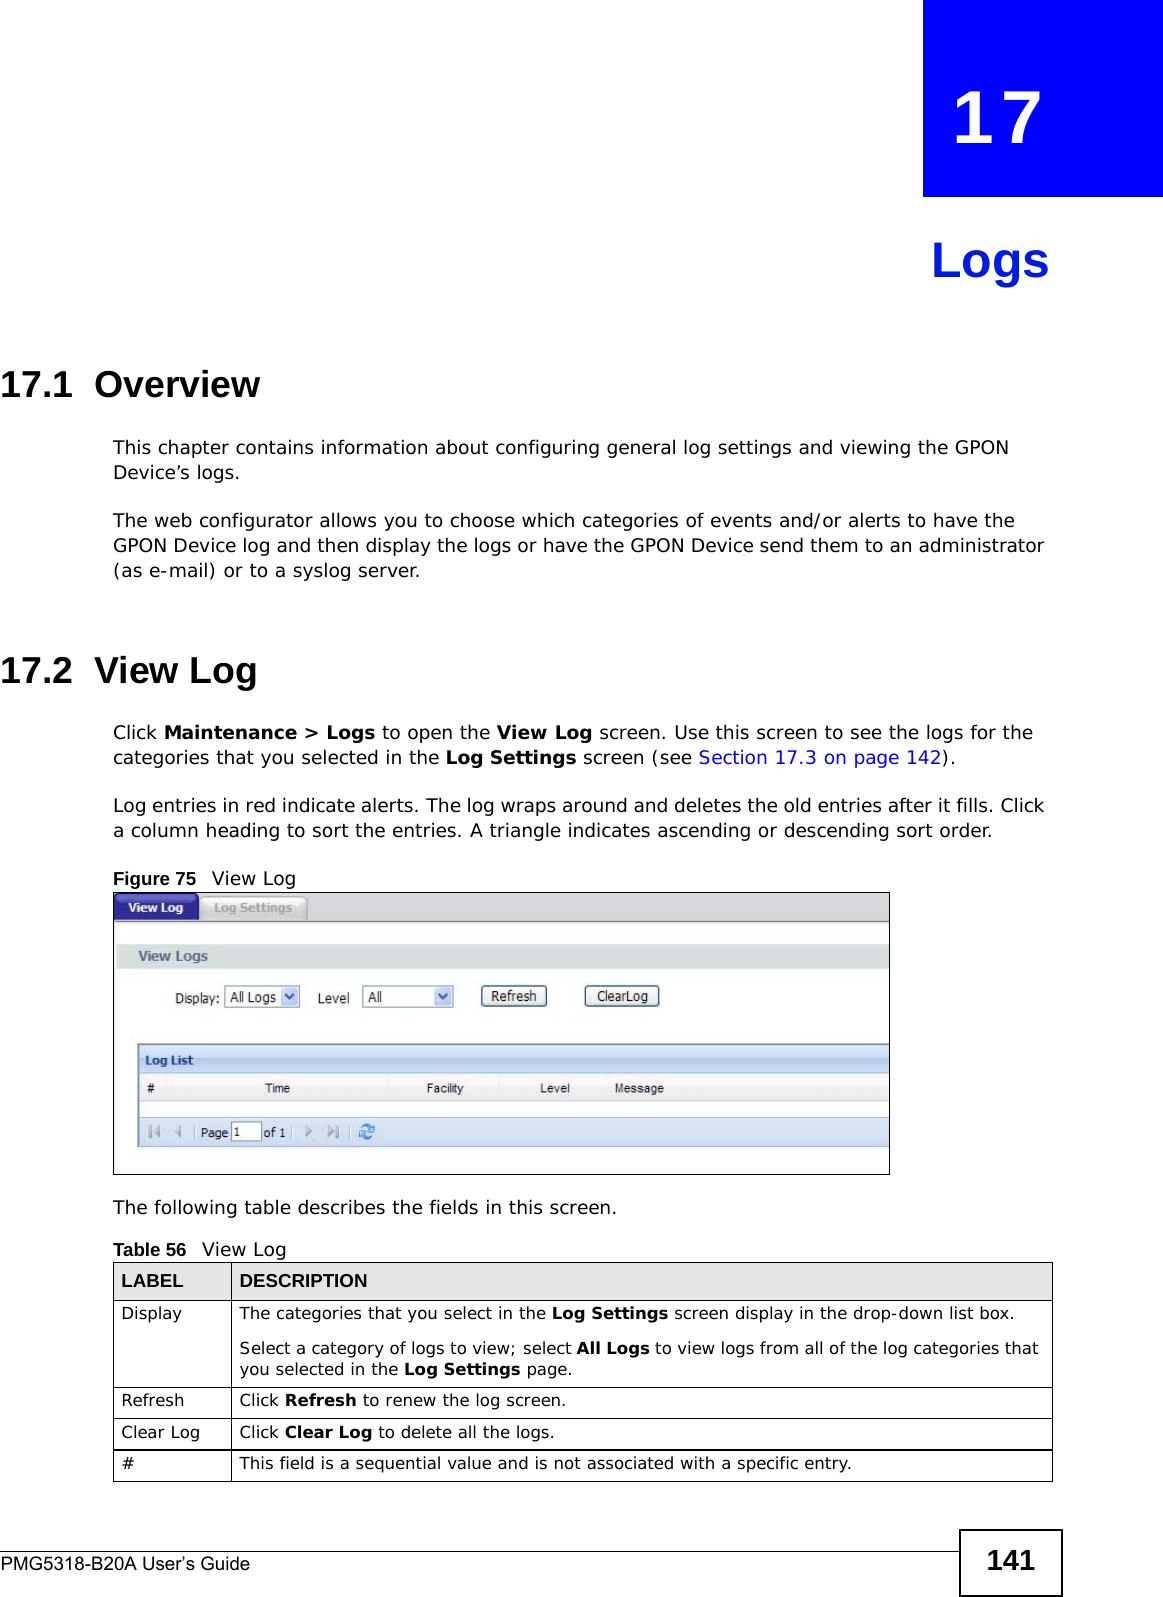 PMG5318-B20A User’s Guide 141CHAPTER   17Logs17.1  OverviewThis chapter contains information about configuring general log settings and viewing the GPON Device’s logs. The web configurator allows you to choose which categories of events and/or alerts to have the GPON Device log and then display the logs or have the GPON Device send them to an administrator (as e-mail) or to a syslog server.17.2  View LogClick Maintenance &gt; Logs to open the View Log screen. Use this screen to see the logs for the categories that you selected in the Log Settings screen (see Section 17.3 on page 142). Log entries in red indicate alerts. The log wraps around and deletes the old entries after it fills. Click a column heading to sort the entries. A triangle indicates ascending or descending sort order. Figure 75   View LogThe following table describes the fields in this screen.   Table 56   View LogLABEL DESCRIPTIONDisplay  The categories that you select in the Log Settings screen display in the drop-down list box.Select a category of logs to view; select All Logs to view logs from all of the log categories that you selected in the Log Settings page. Refresh Click Refresh to renew the log screen. Clear Log  Click Clear Log to delete all the logs. #This field is a sequential value and is not associated with a specific entry.